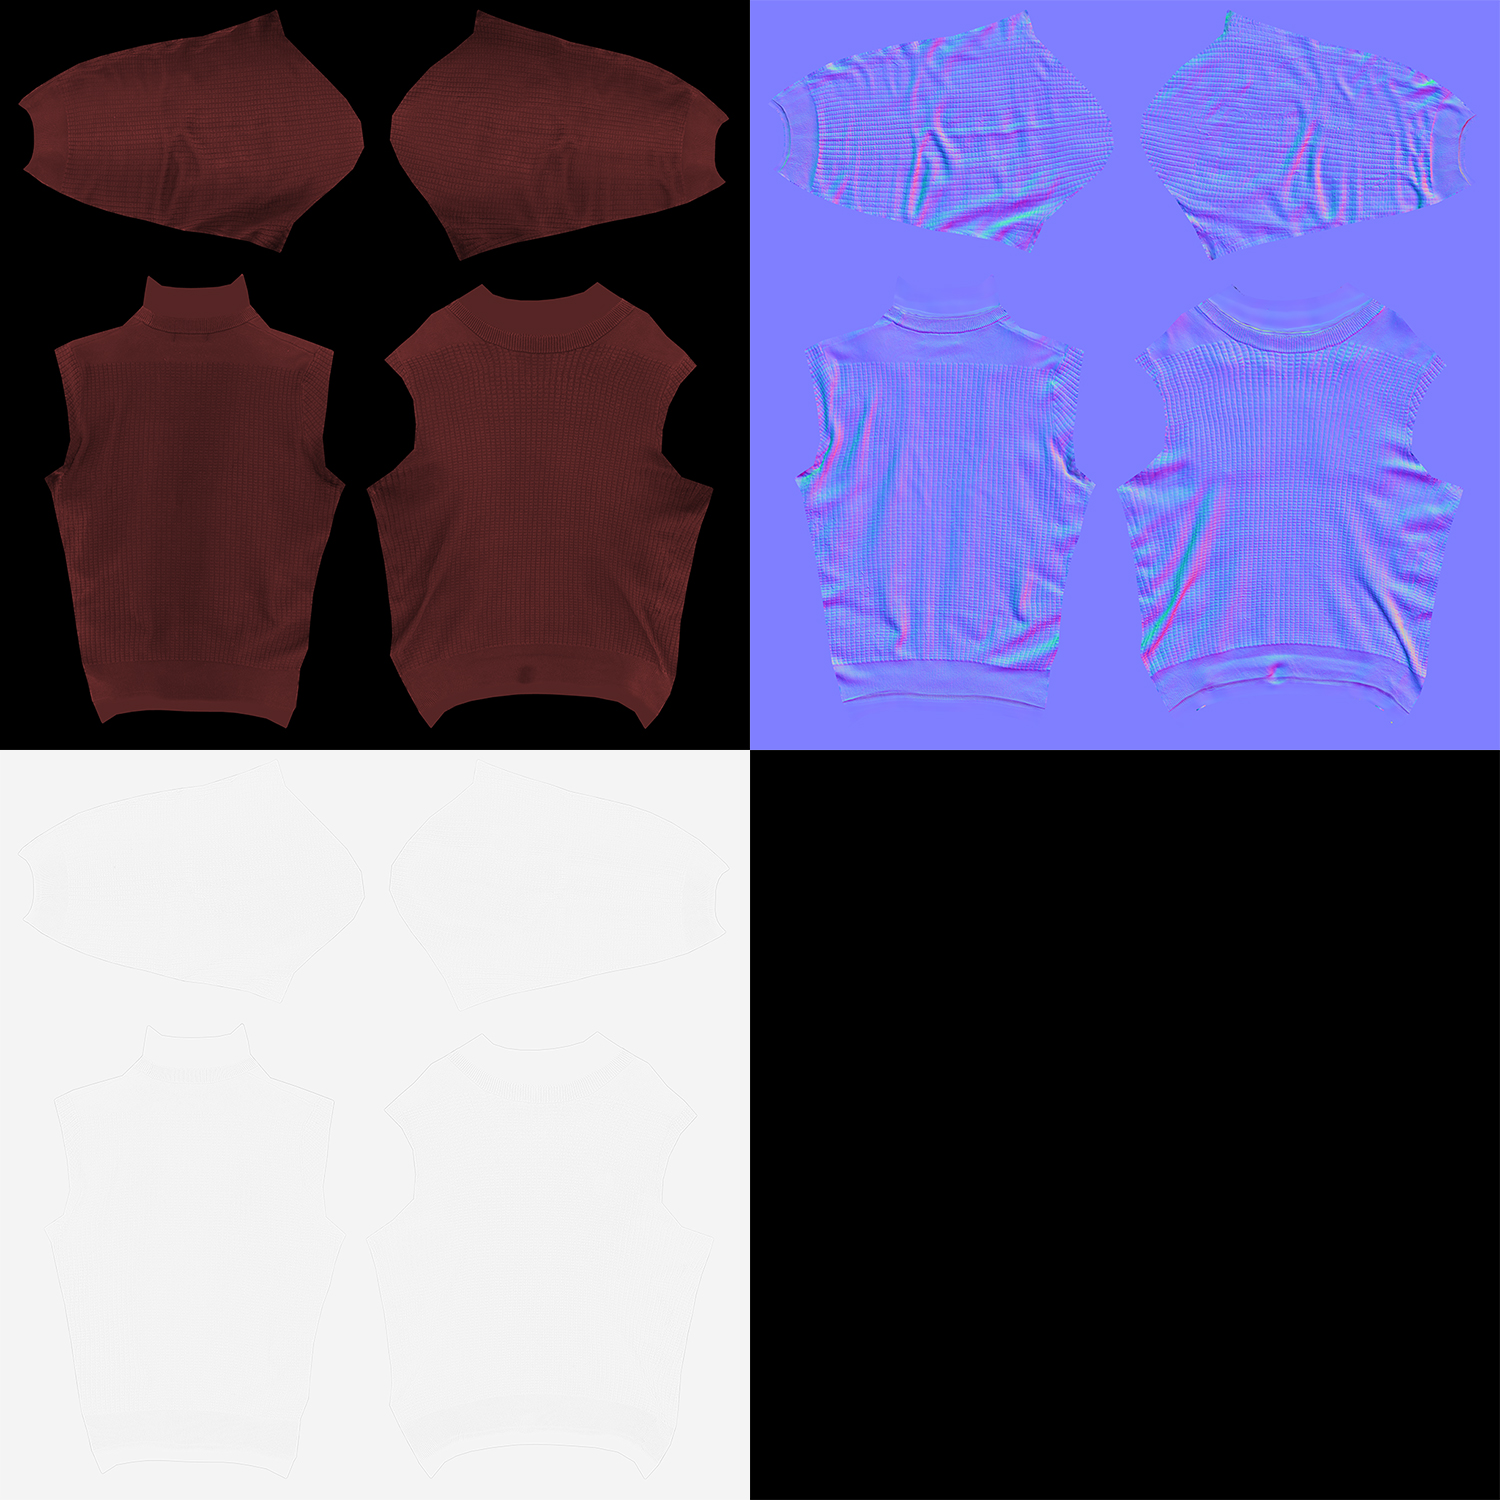 PBR fabric sweater textures